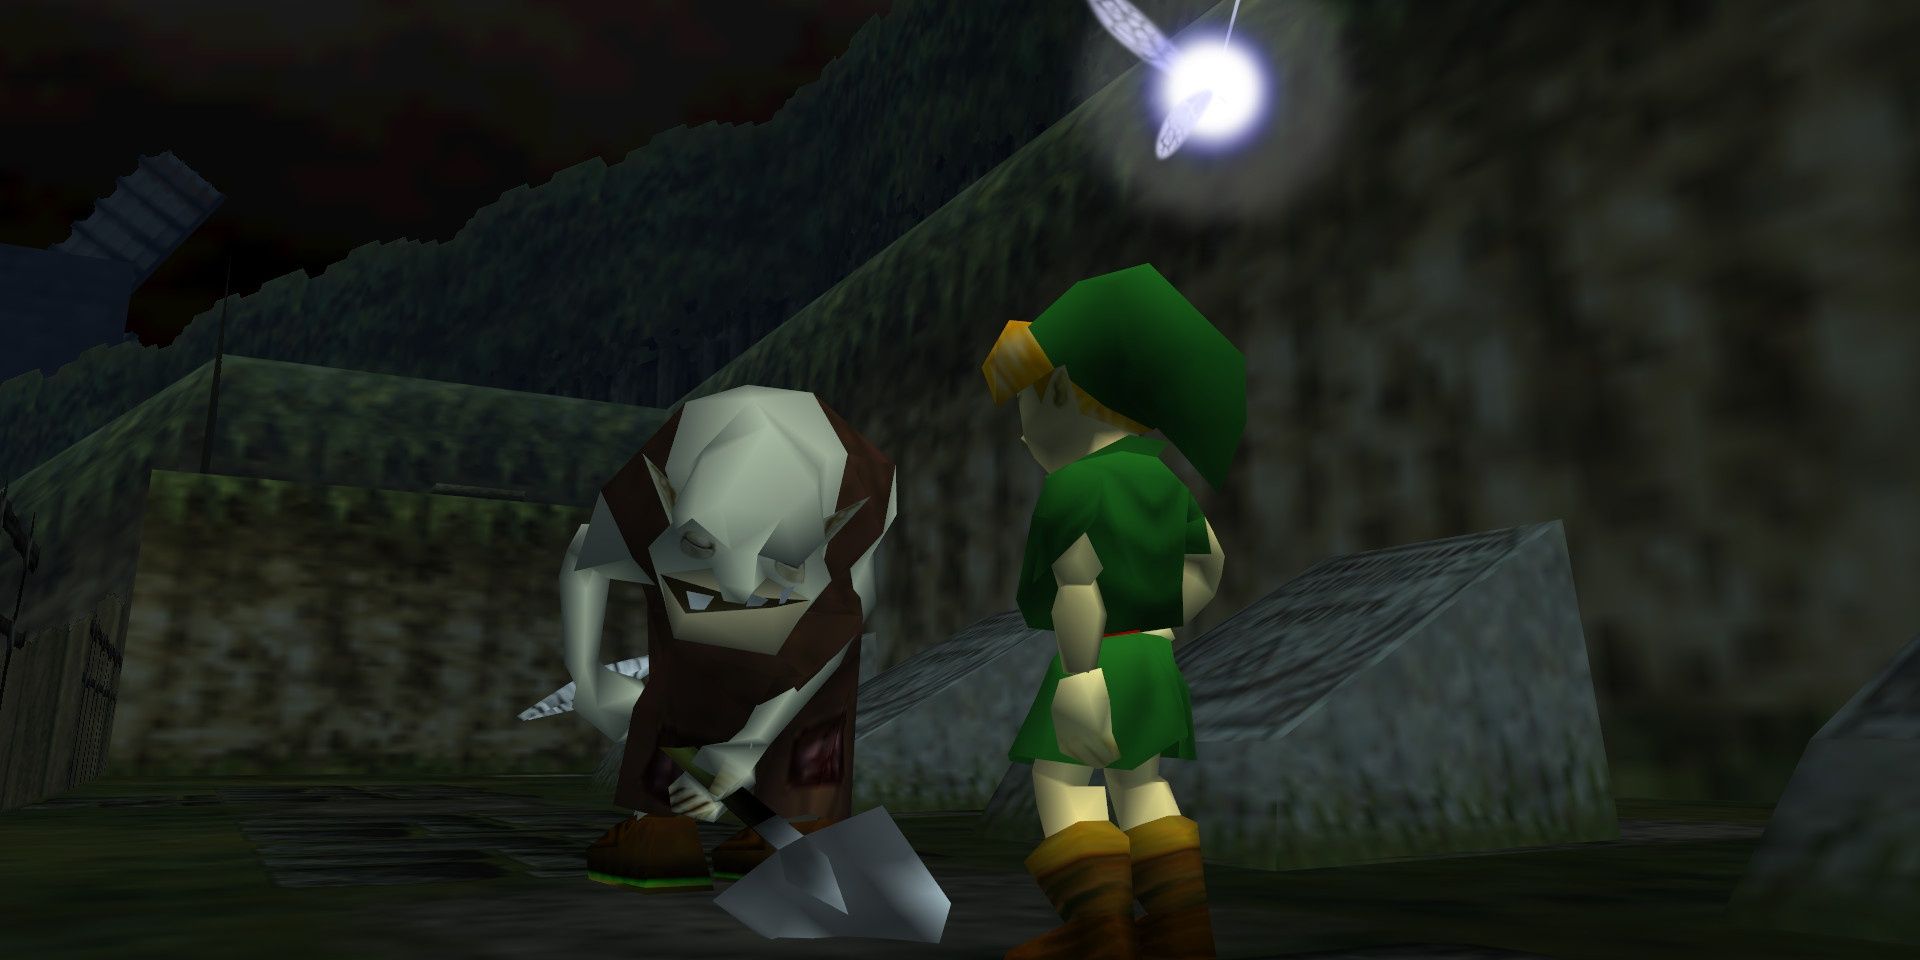 Dampe Digging A Grave In Front Of Link And Navi